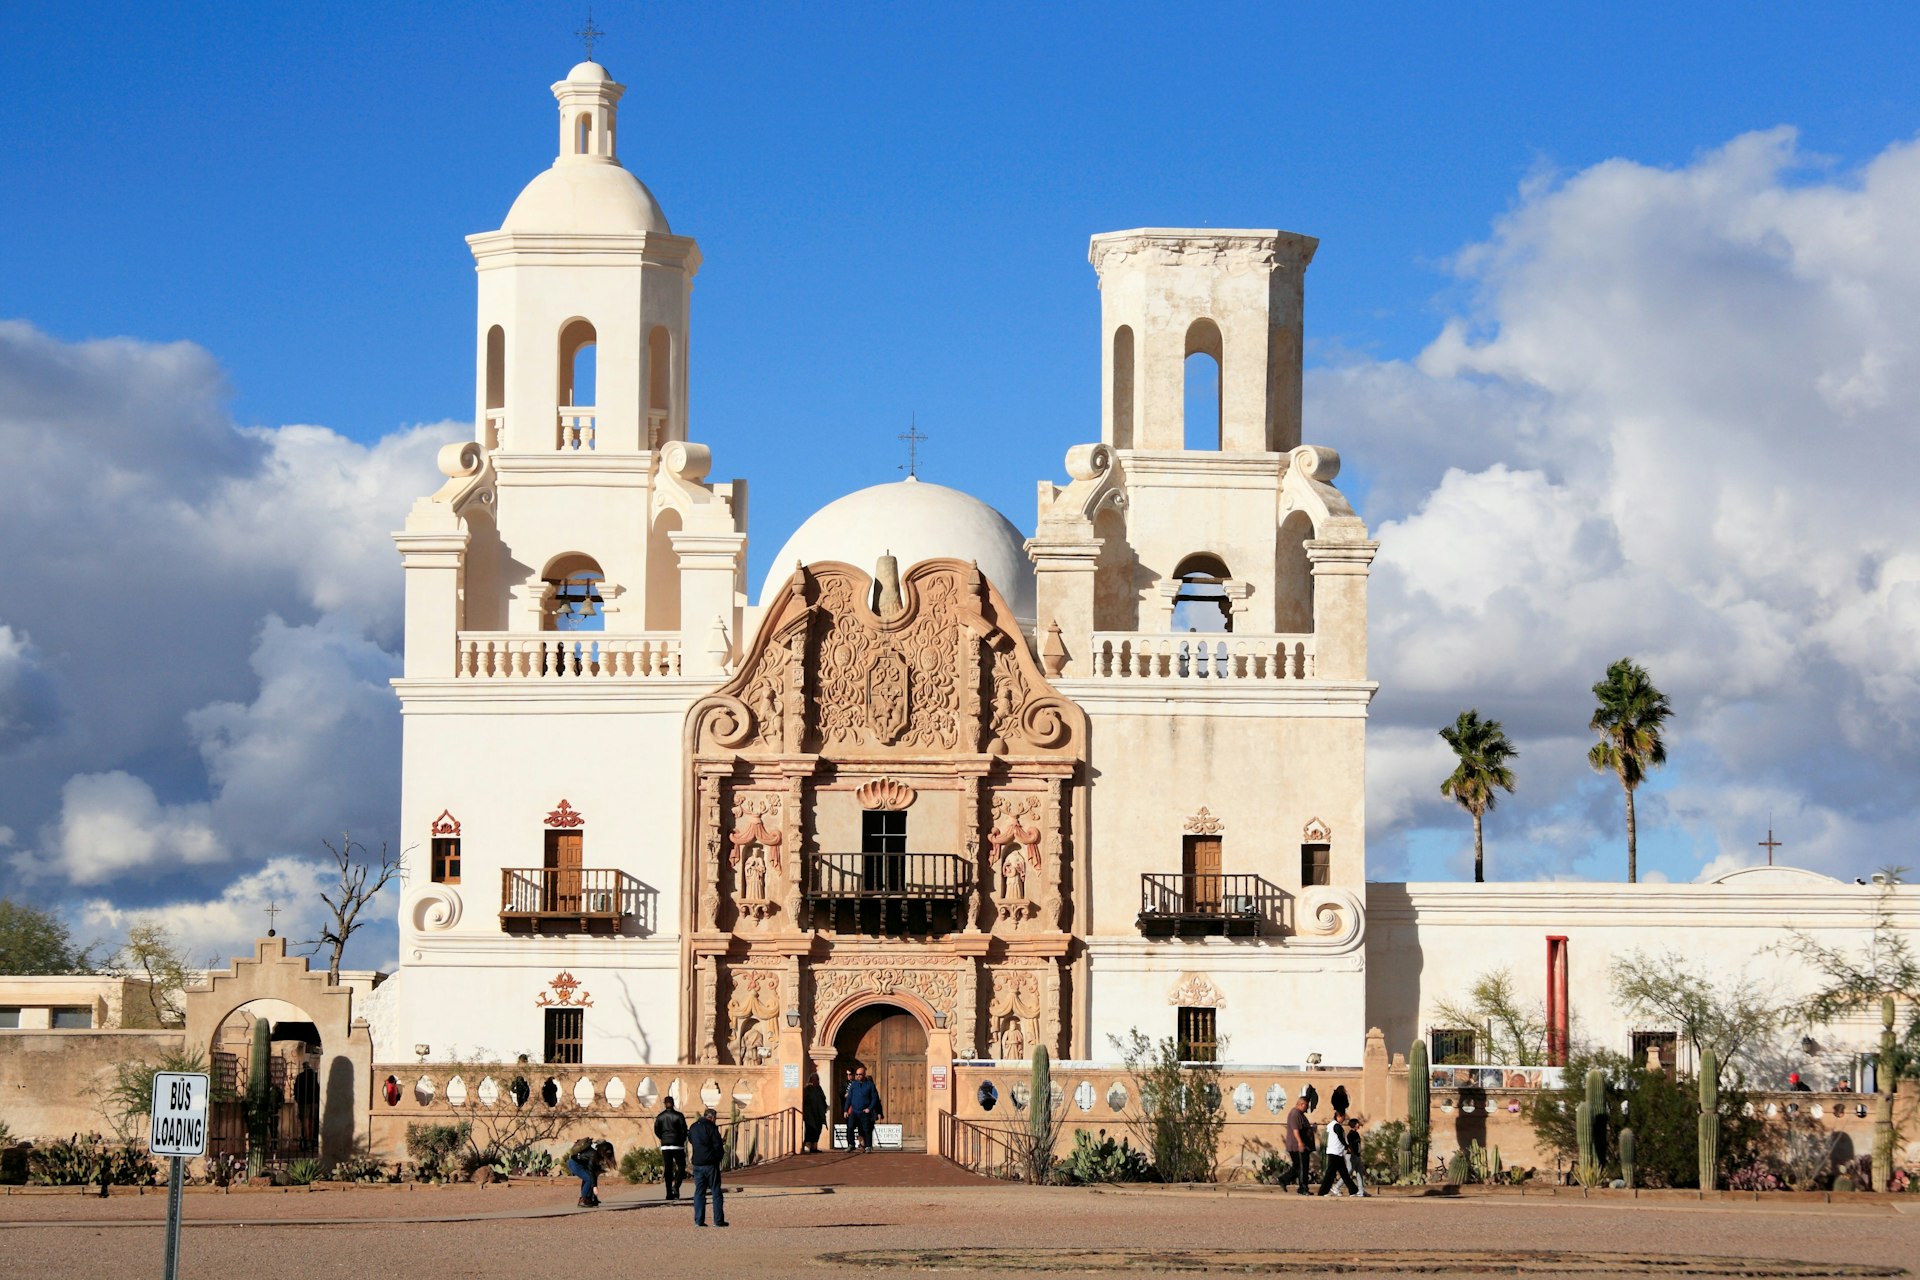 The famous Mission San Xavier del Bac under a dramatic sky in Tucson City, Arizona